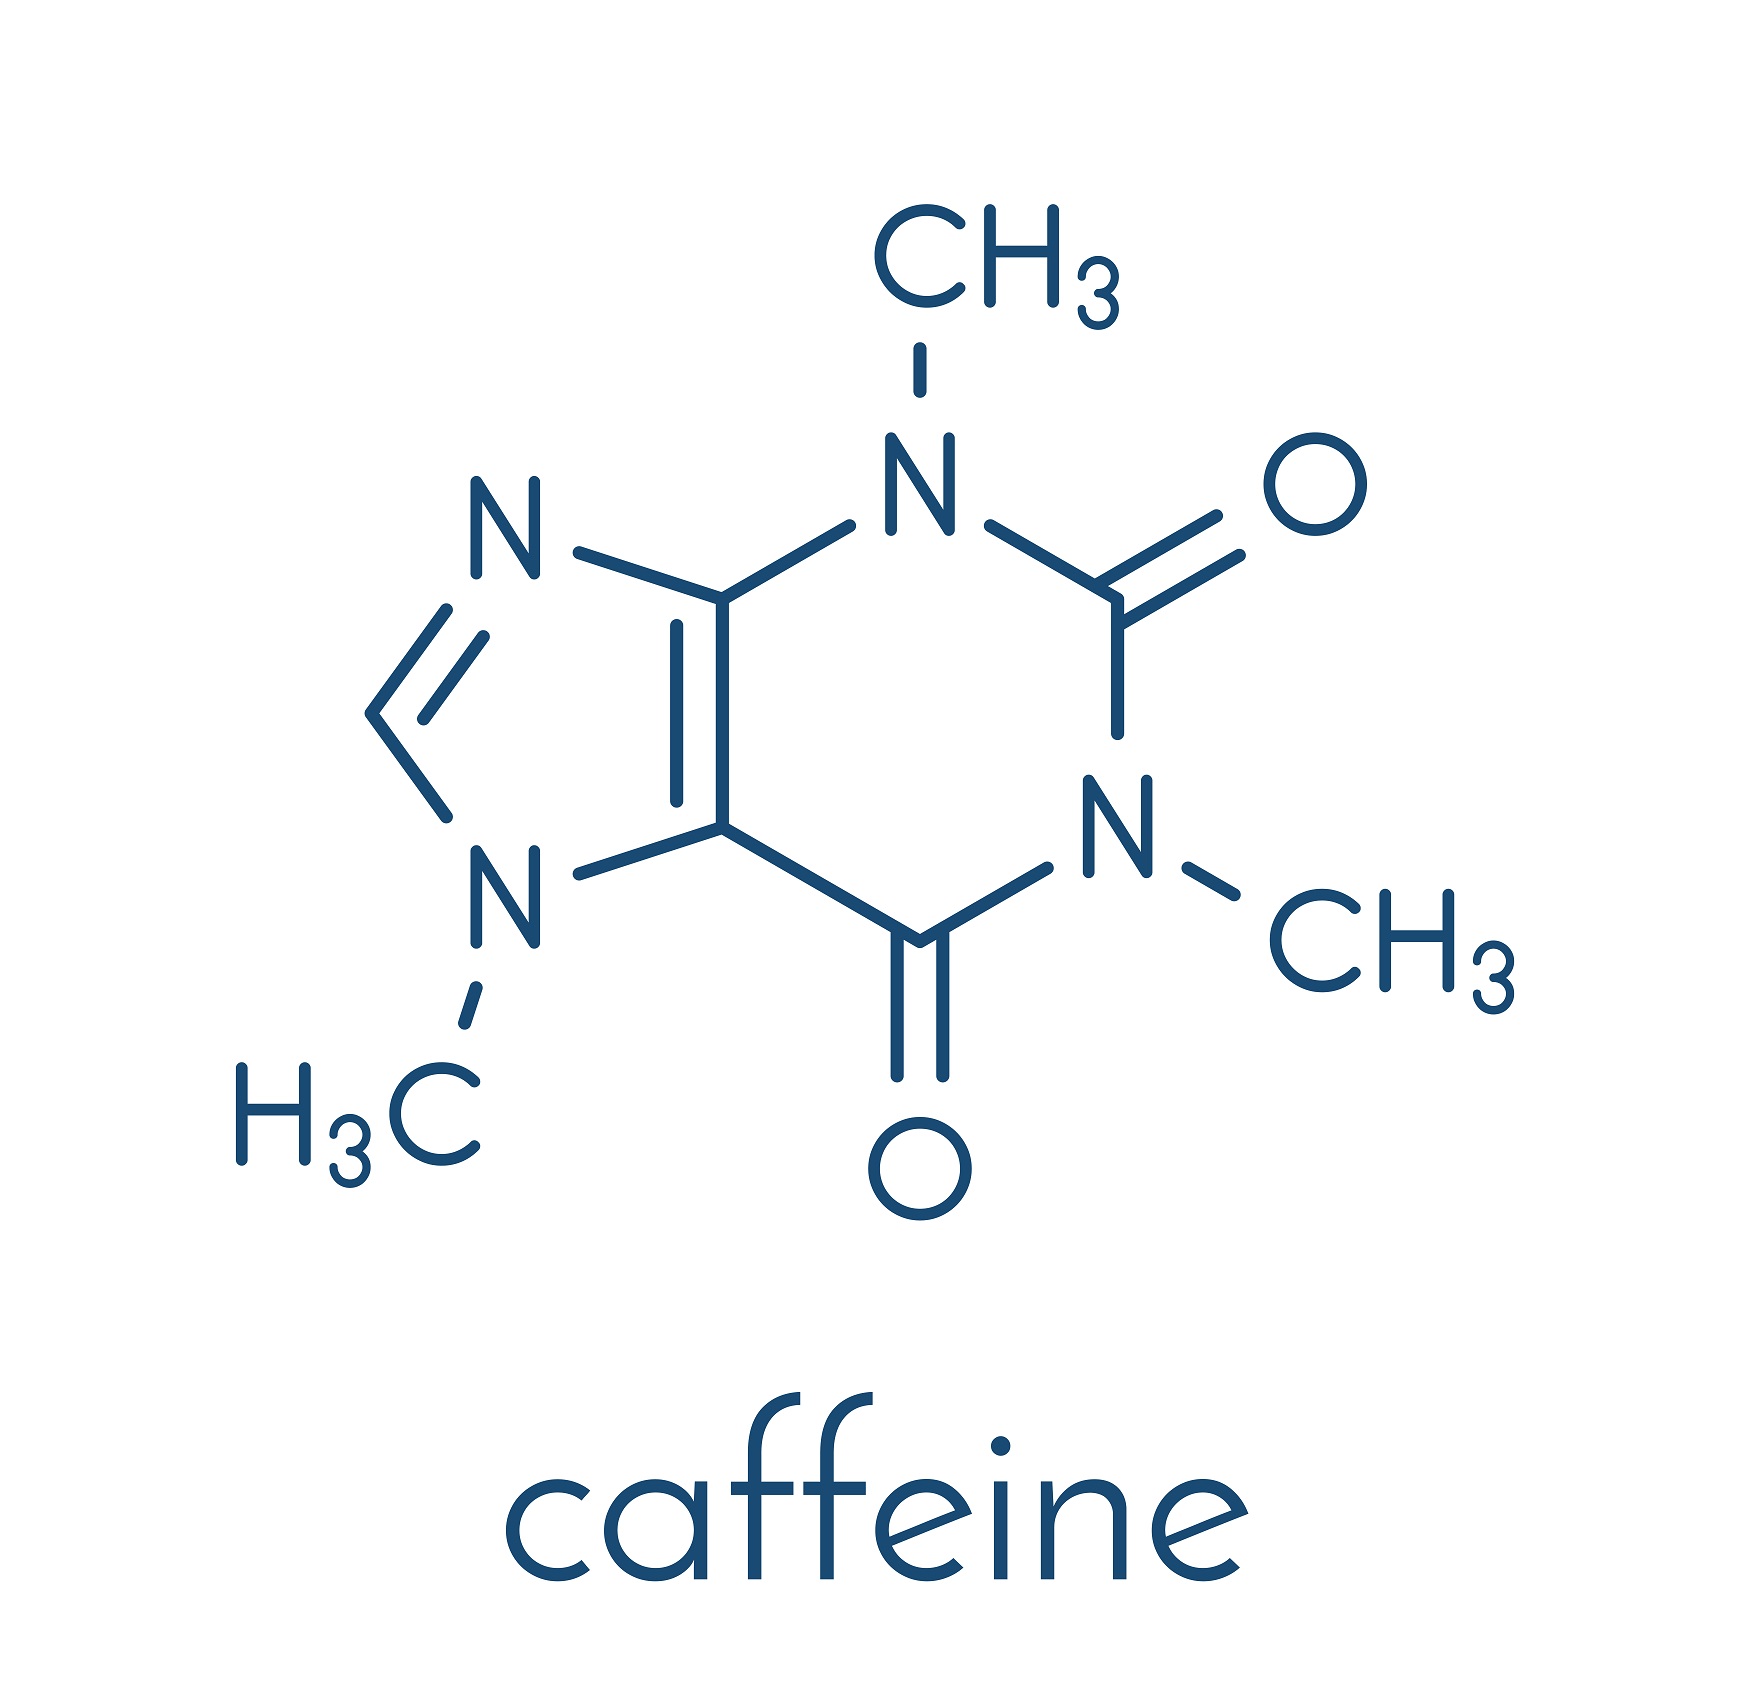 Caffeine - the most known and effective stimulant